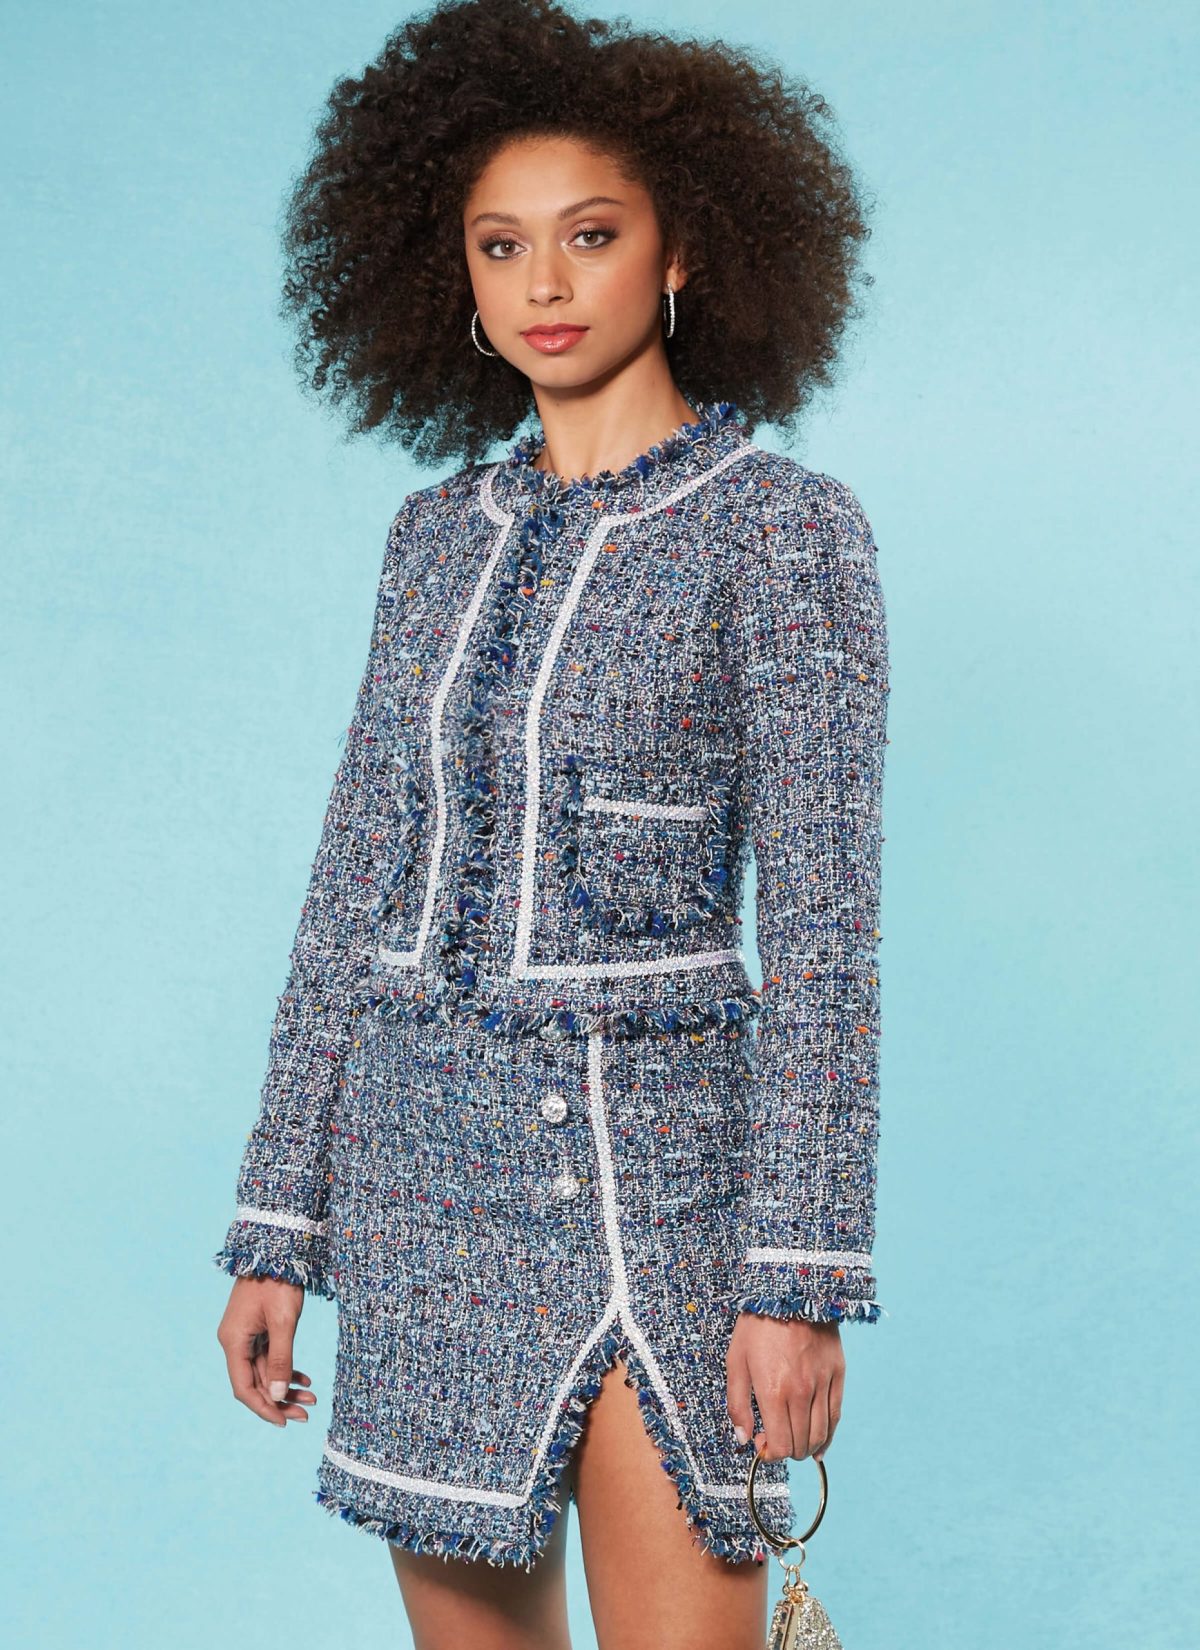 McCall's Sewing Pattern M8370 Misses' Jacket and Skirt